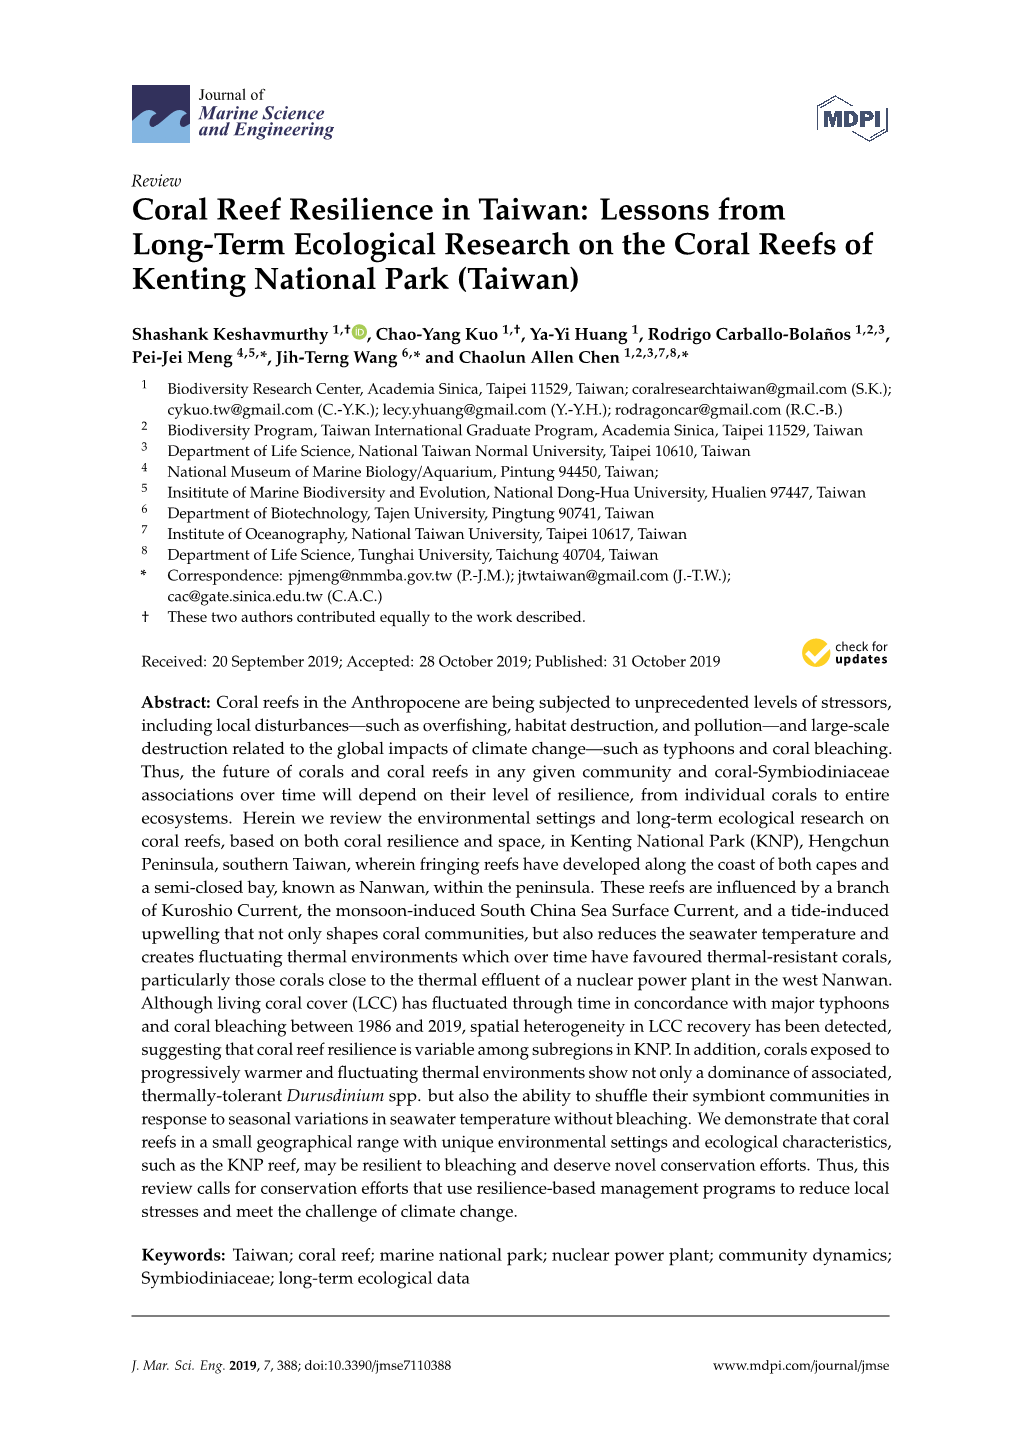 Coral Reef Resilience in Taiwan: Lessons from Long-Term Ecological Research on the Coral Reefs of Kenting National Park (Taiwan)